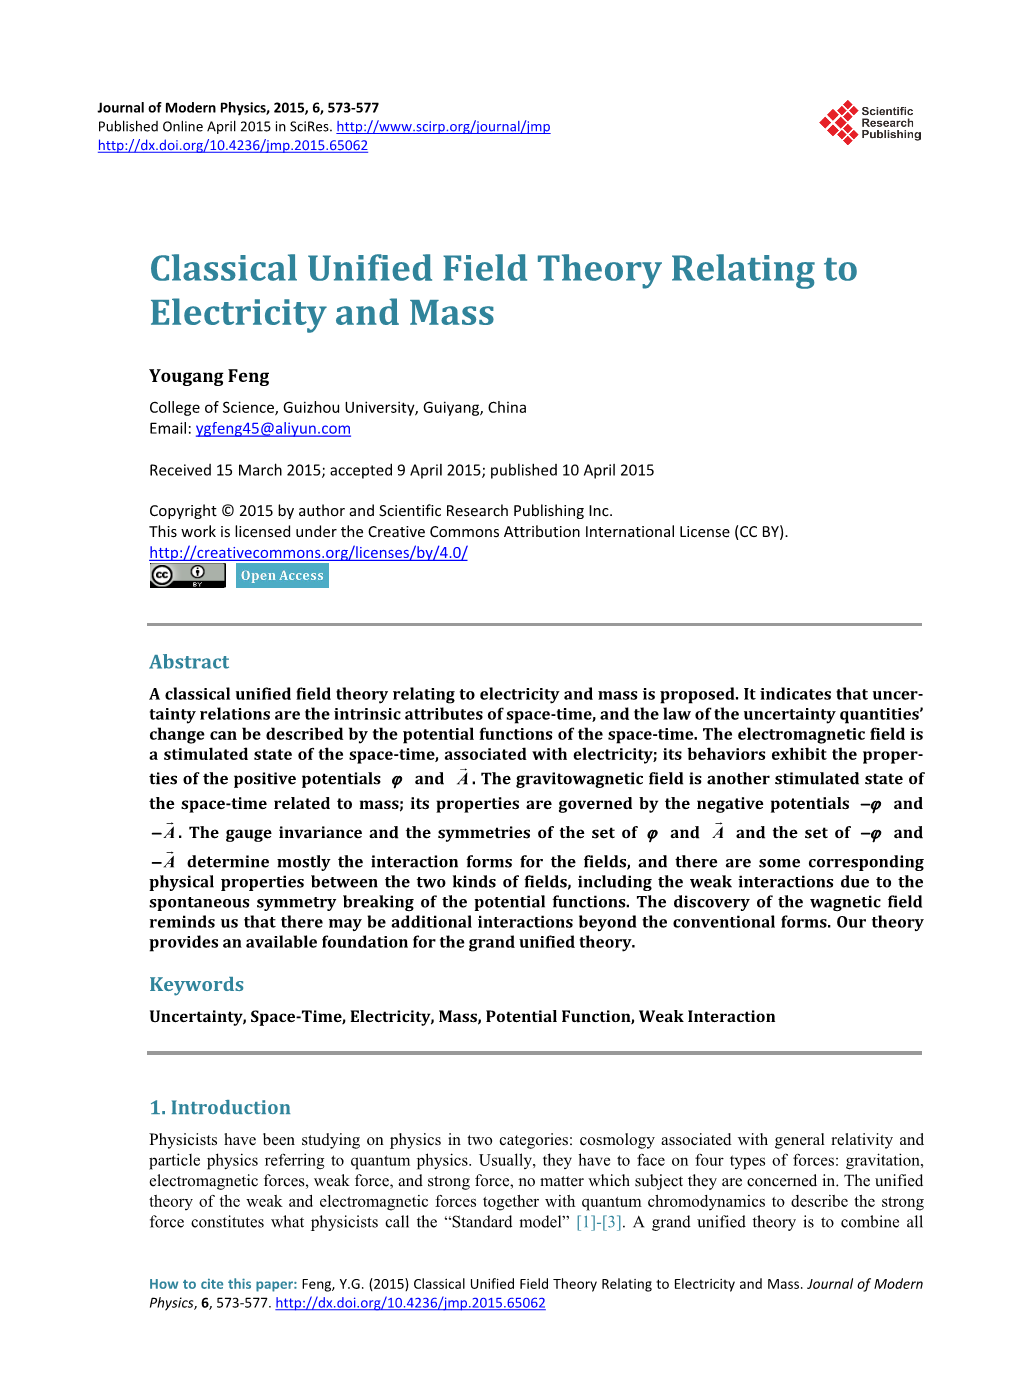 Classical Unified Field Theory Relating to Electricity and Mass